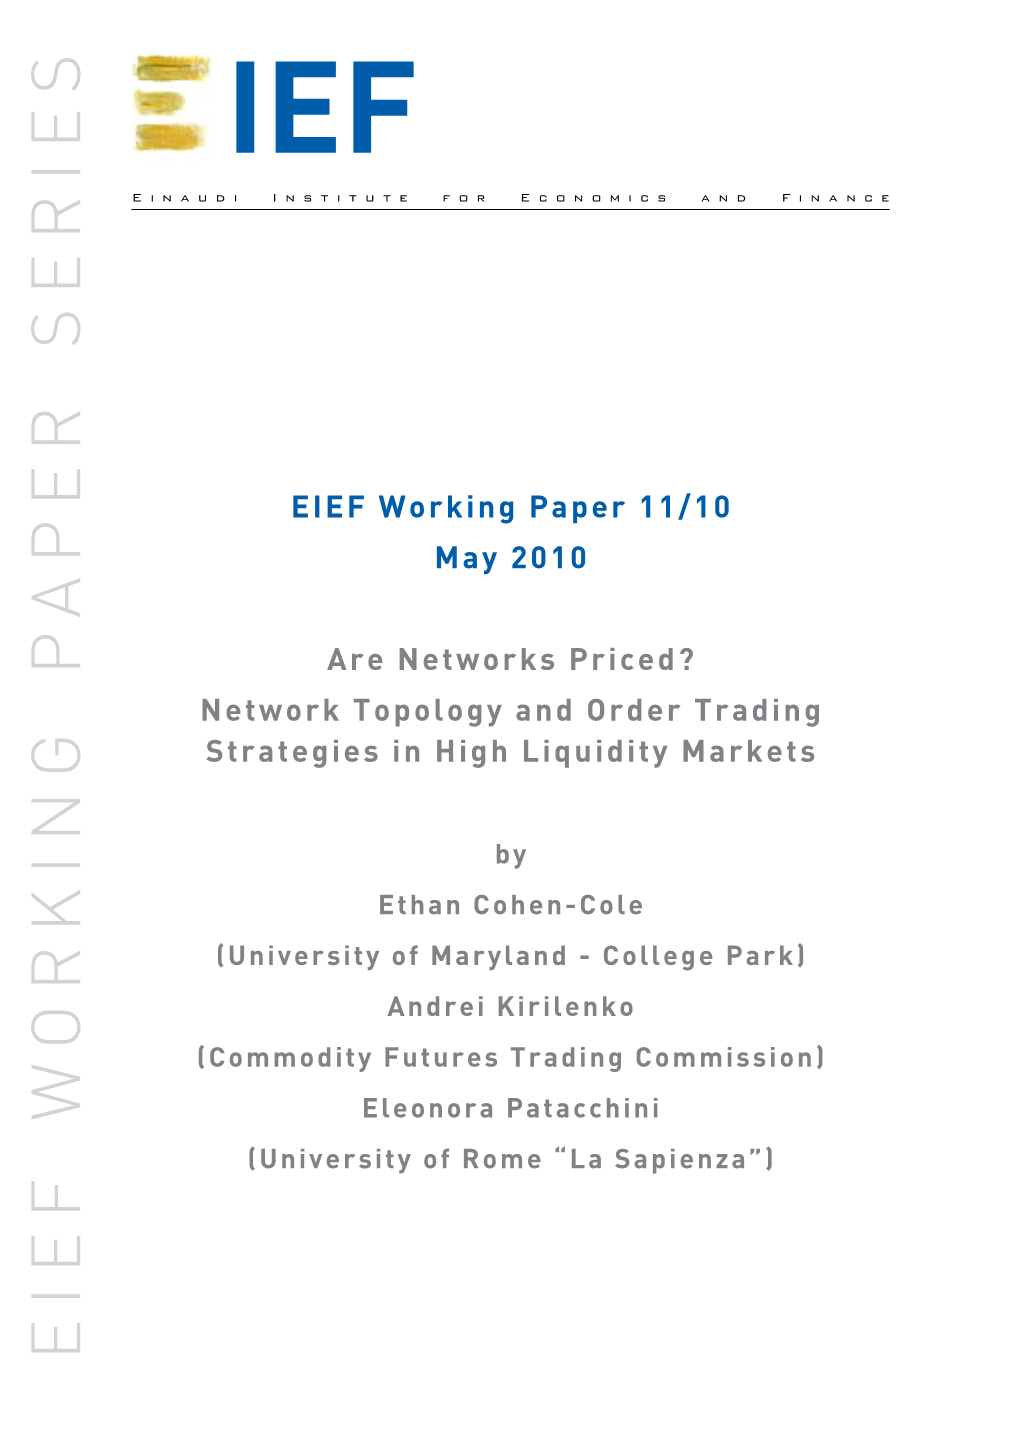 Network Topology and Order Trading Strategies in High Liquidity Markets